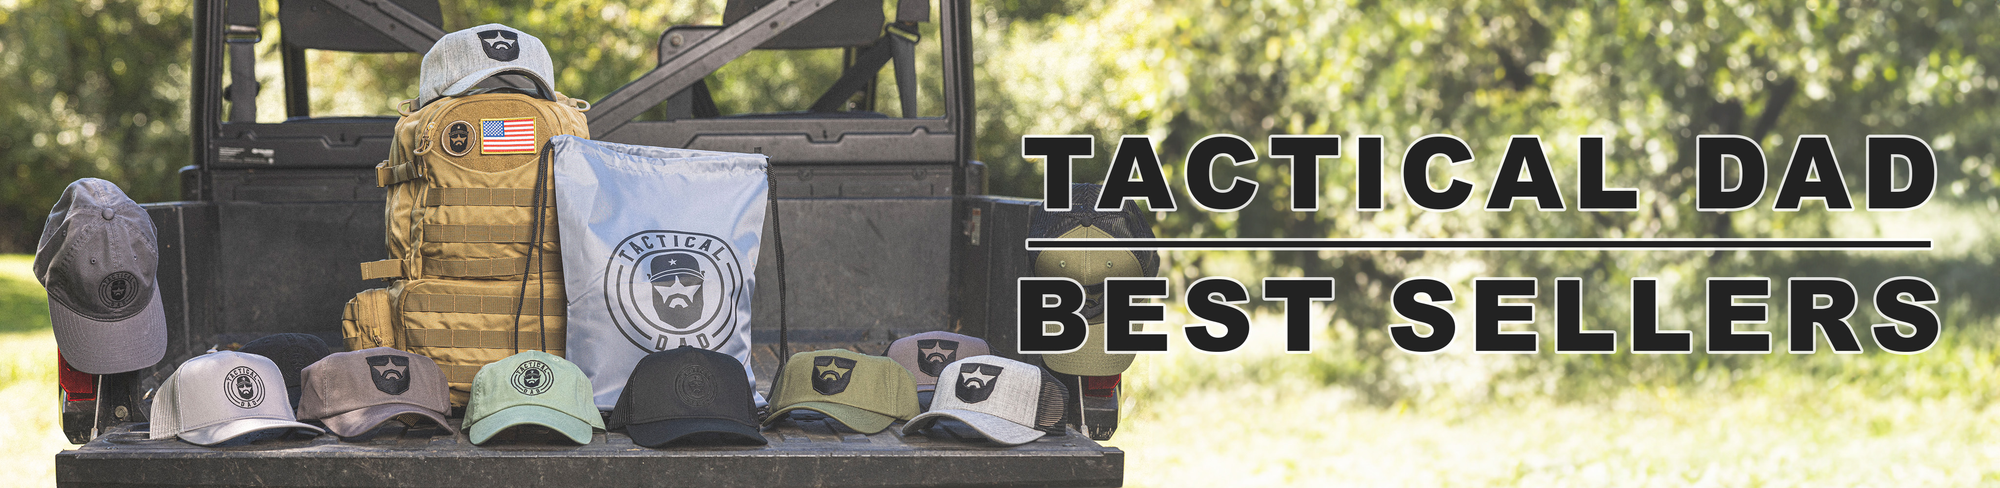 Tactical Dad Best Sellers Jeep with hats and backpacks